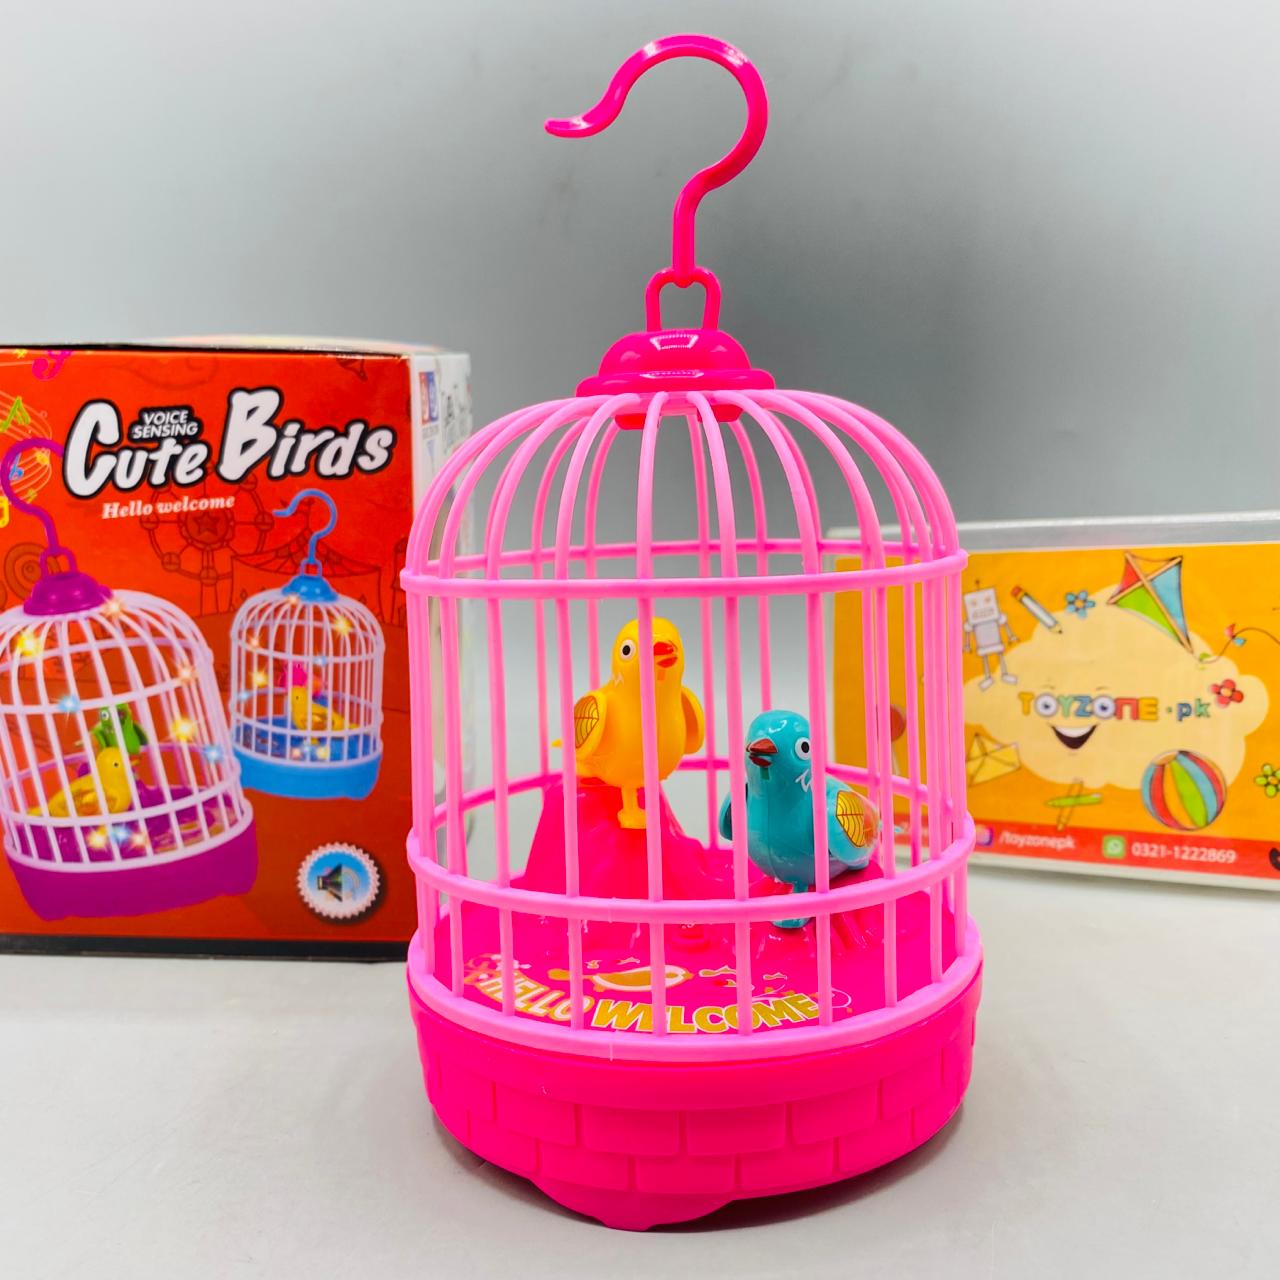 Birds Cage With Light & Sound